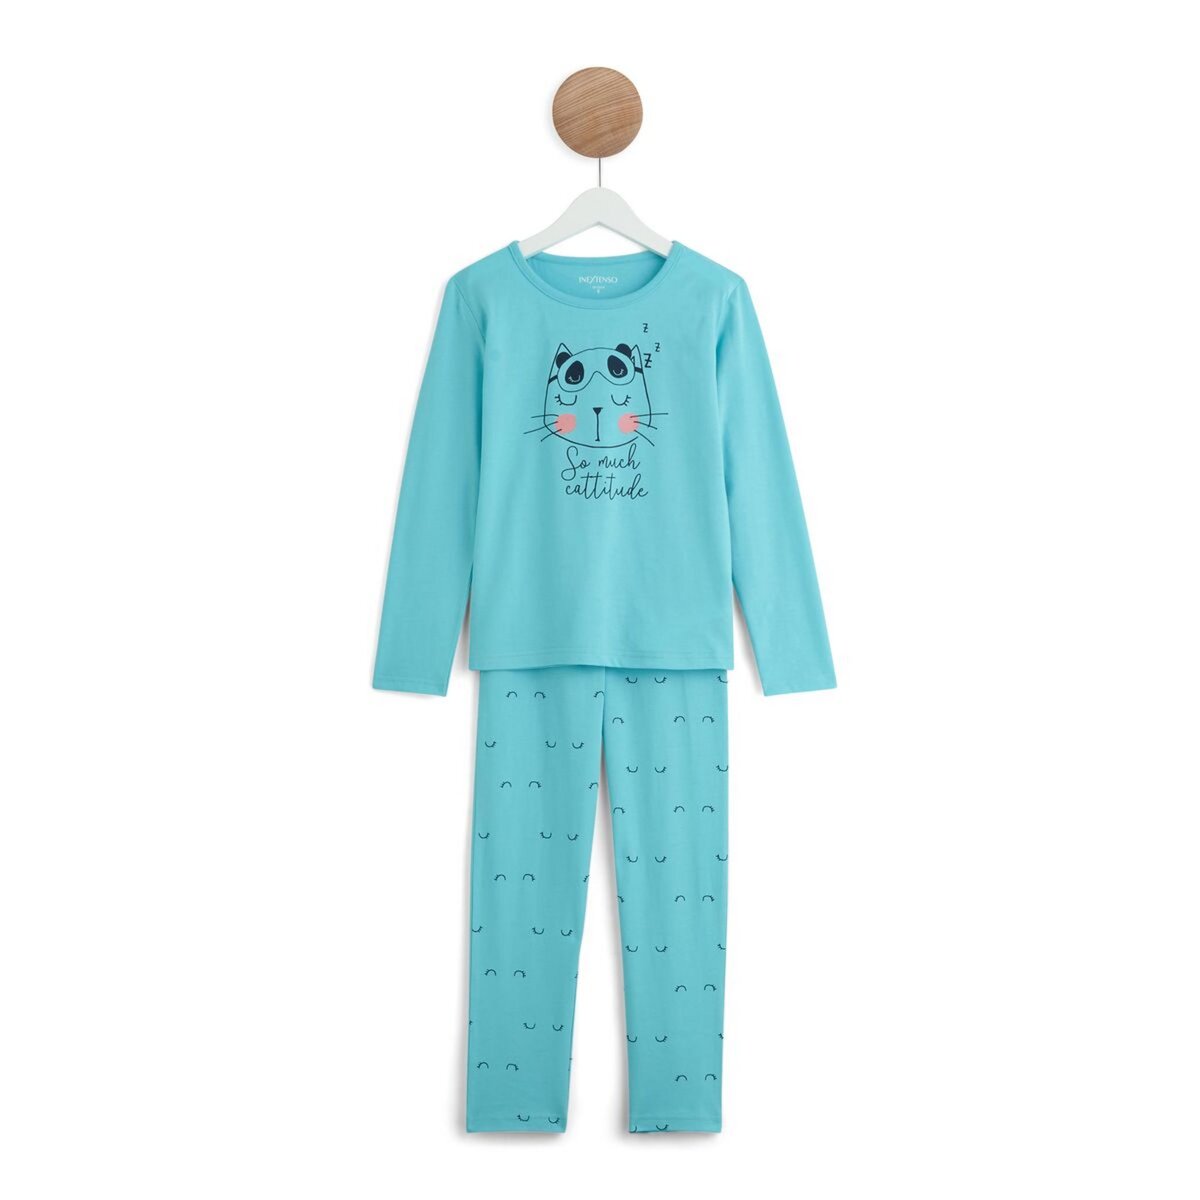 IN EXTENSO Ensemble pyjama chat fille